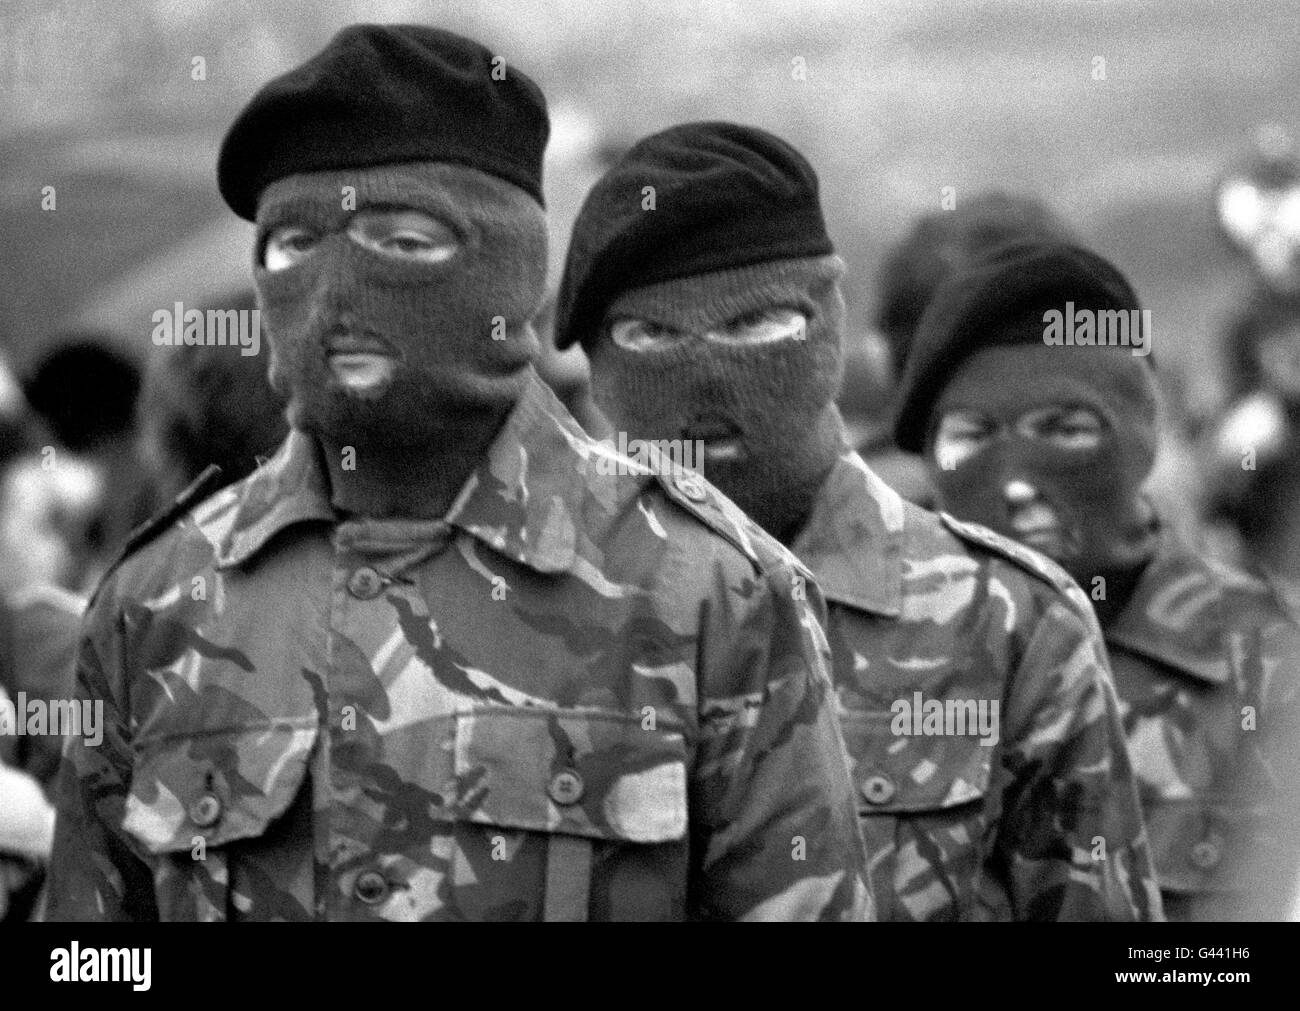 Masked IRA Provisionals escorting the coffin at the funeral of hunger striker Bobby Sands. 24/1/96 The Northern Ireland Peace Process International Arms Commission today issued their report, concluding that paramilitary organisations would not decommission any arms before inclusive discussions began. Stock Photo